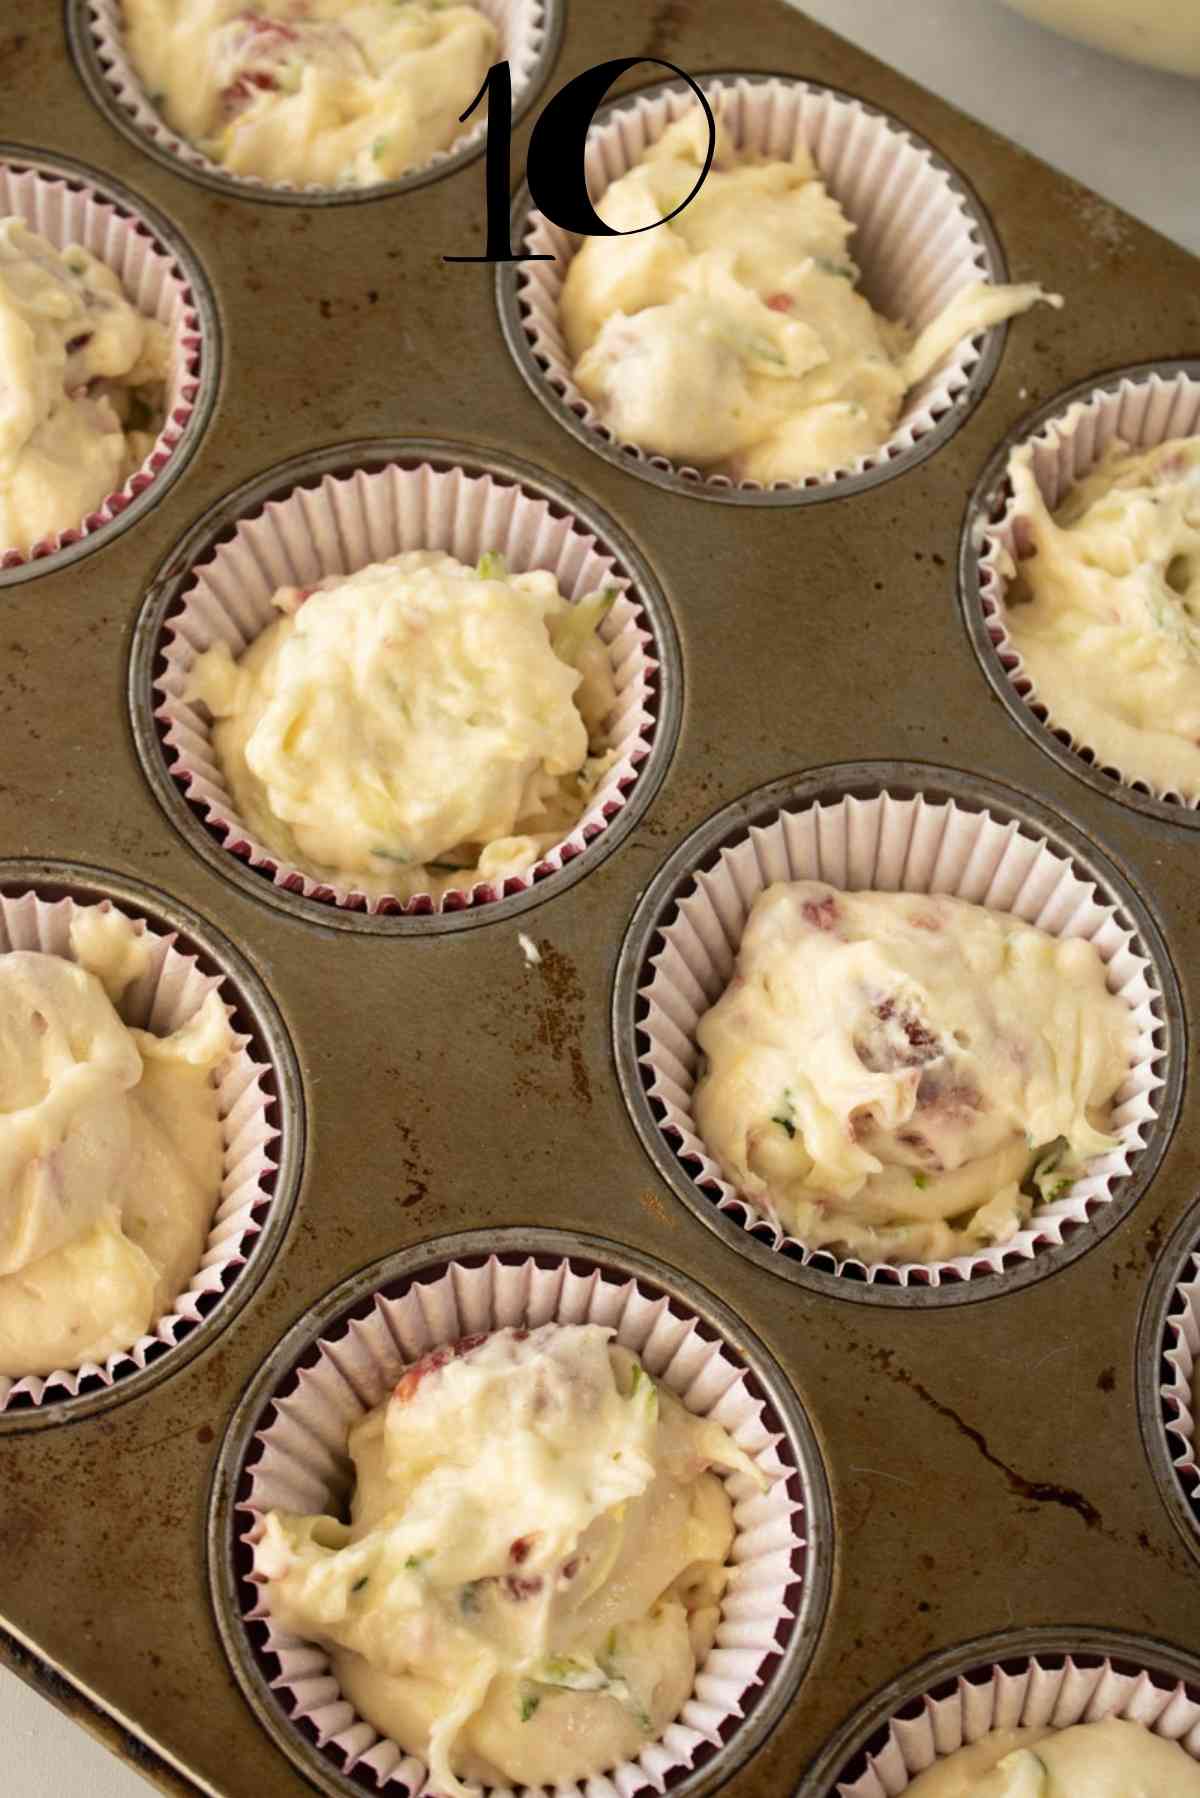 Fill 18 prepared muffin cups with batter.